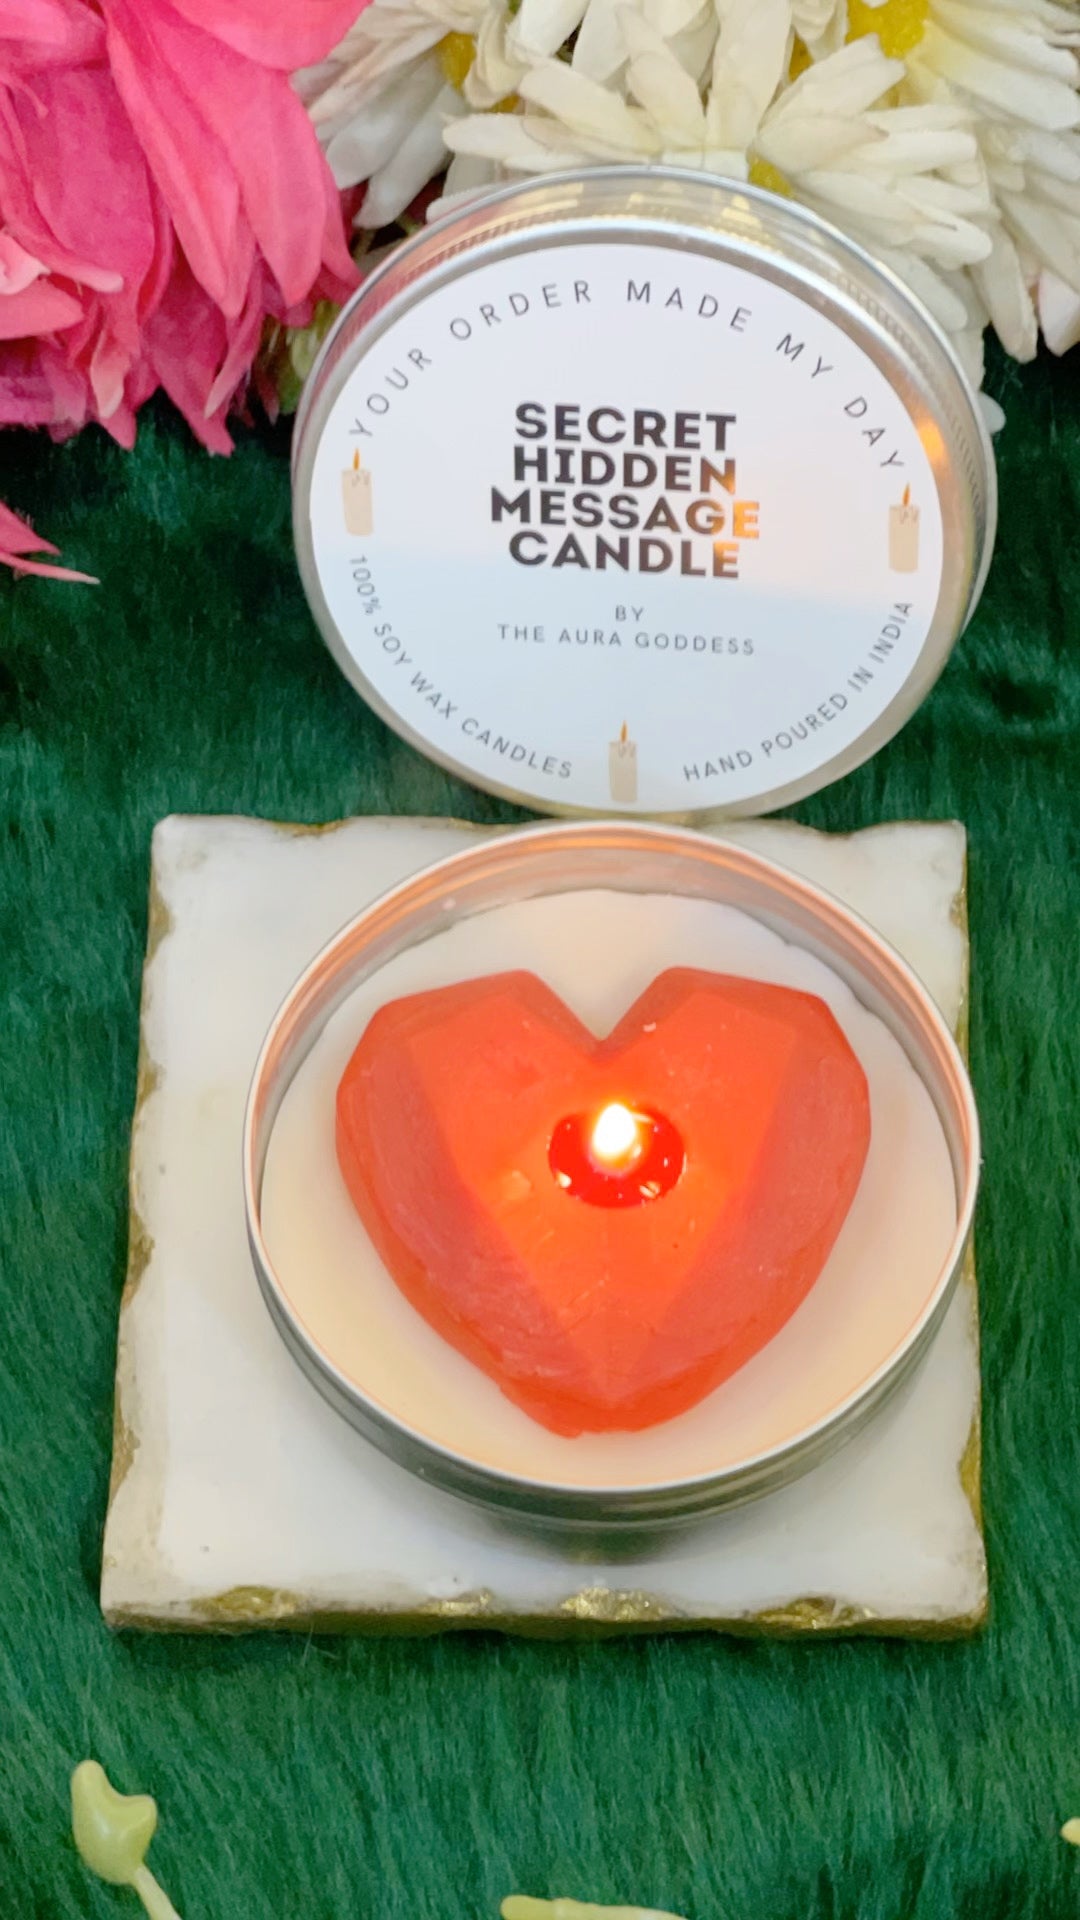 Secret hidden message candle with topping